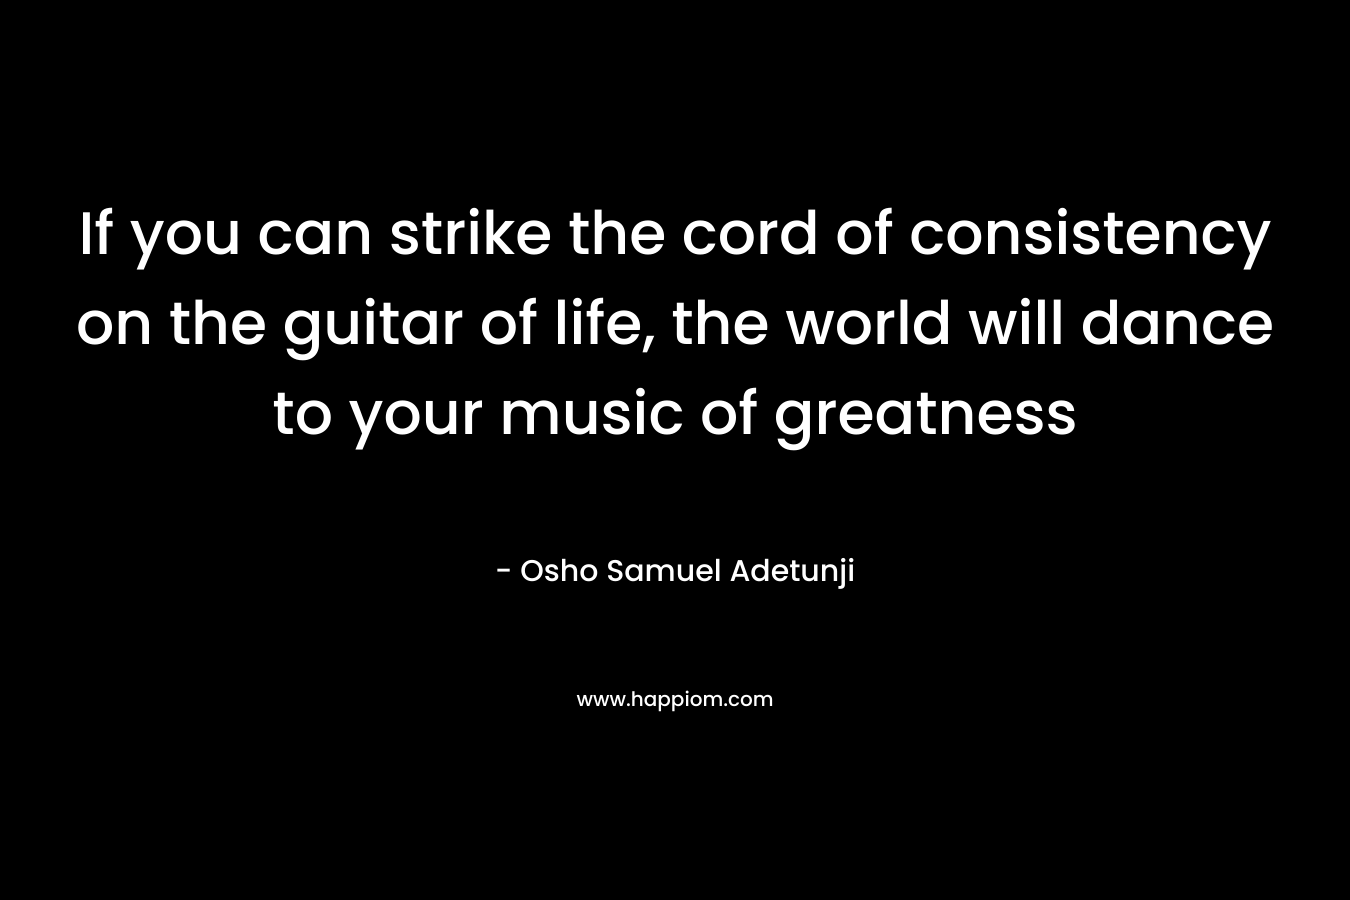 If you can strike the cord of consistency on the guitar of life, the world will dance to your music of greatness – Osho Samuel Adetunji